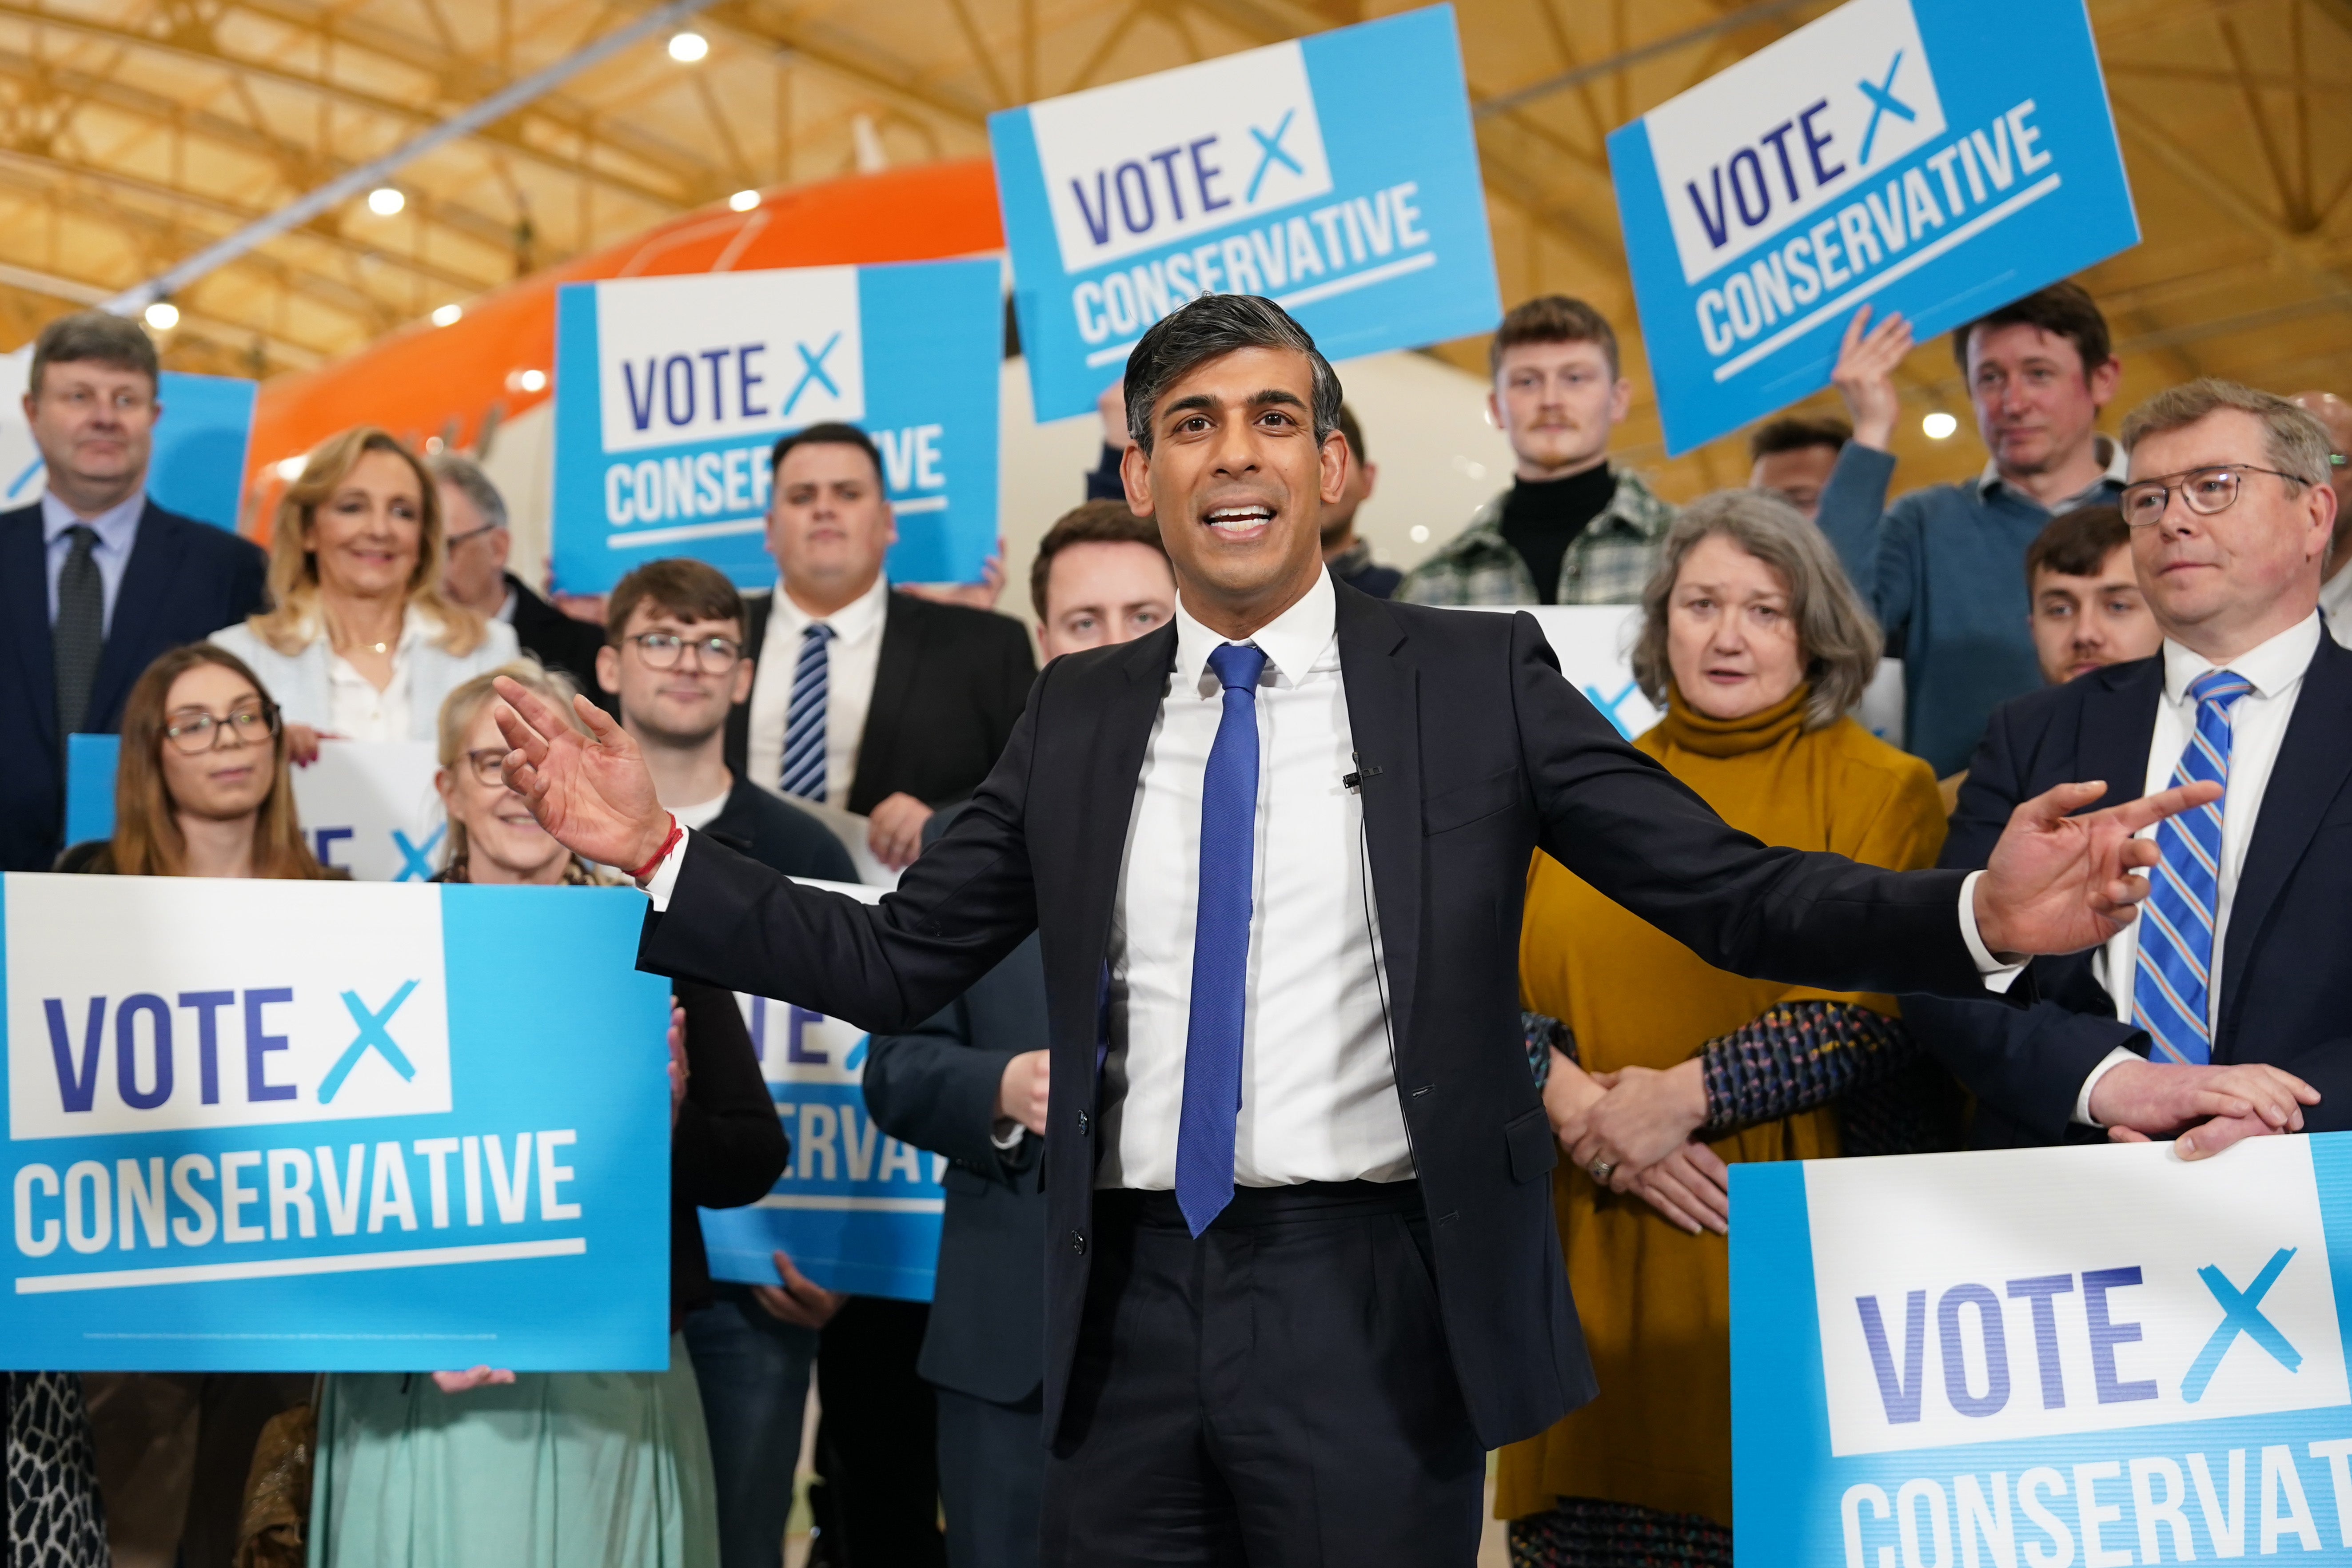 Rishi Sunak defended the claim the general election will lead to a hung parliament